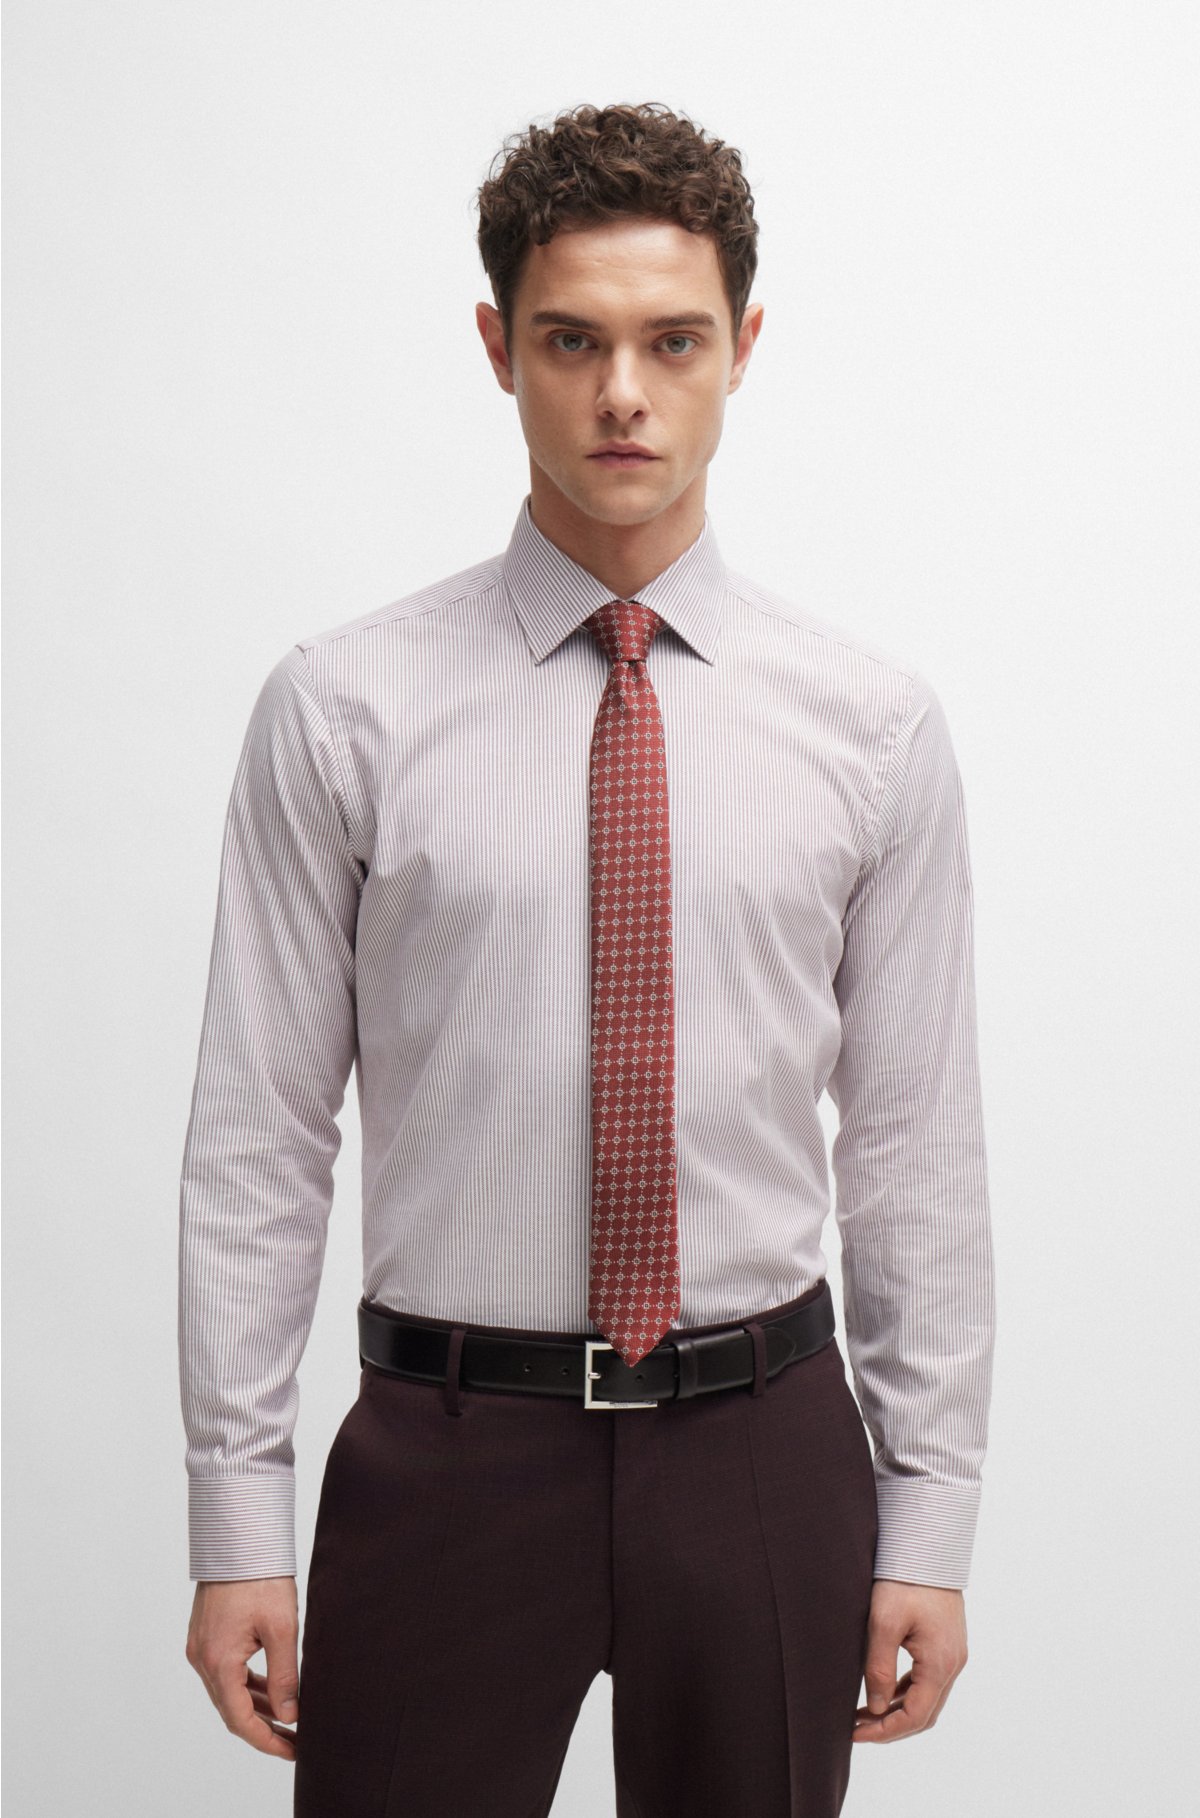 Silk-blend tie with jacquard-woven pattern, Dark Red